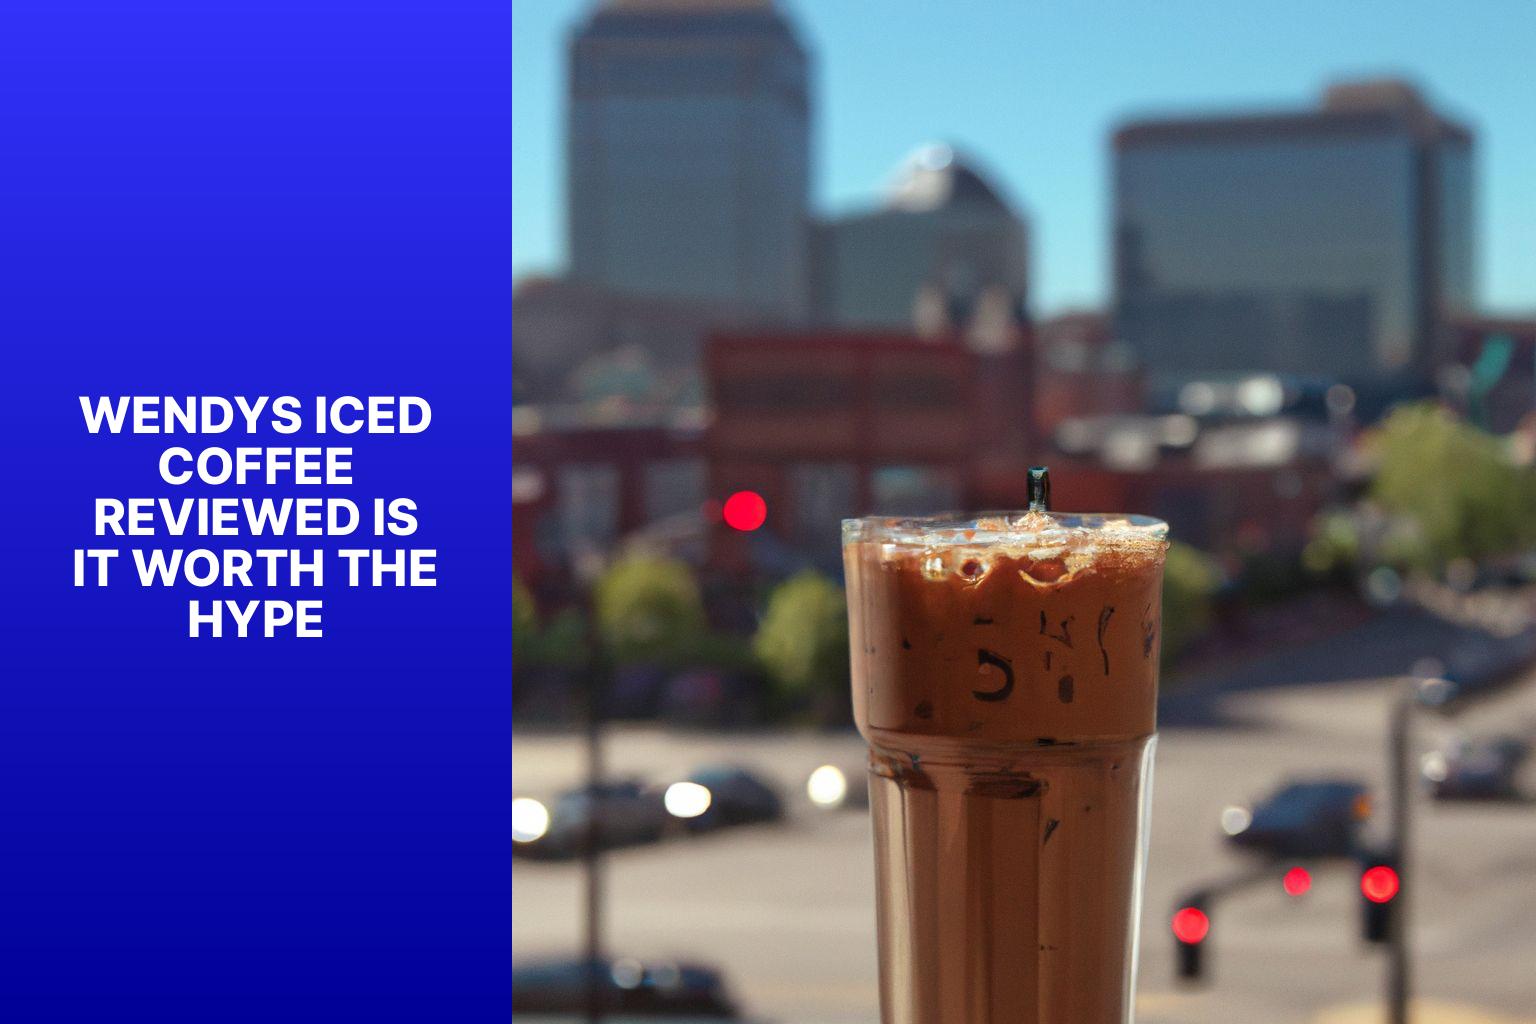 Wendy’s Iced Coffee Reviewed: Is It Worth the Hype?